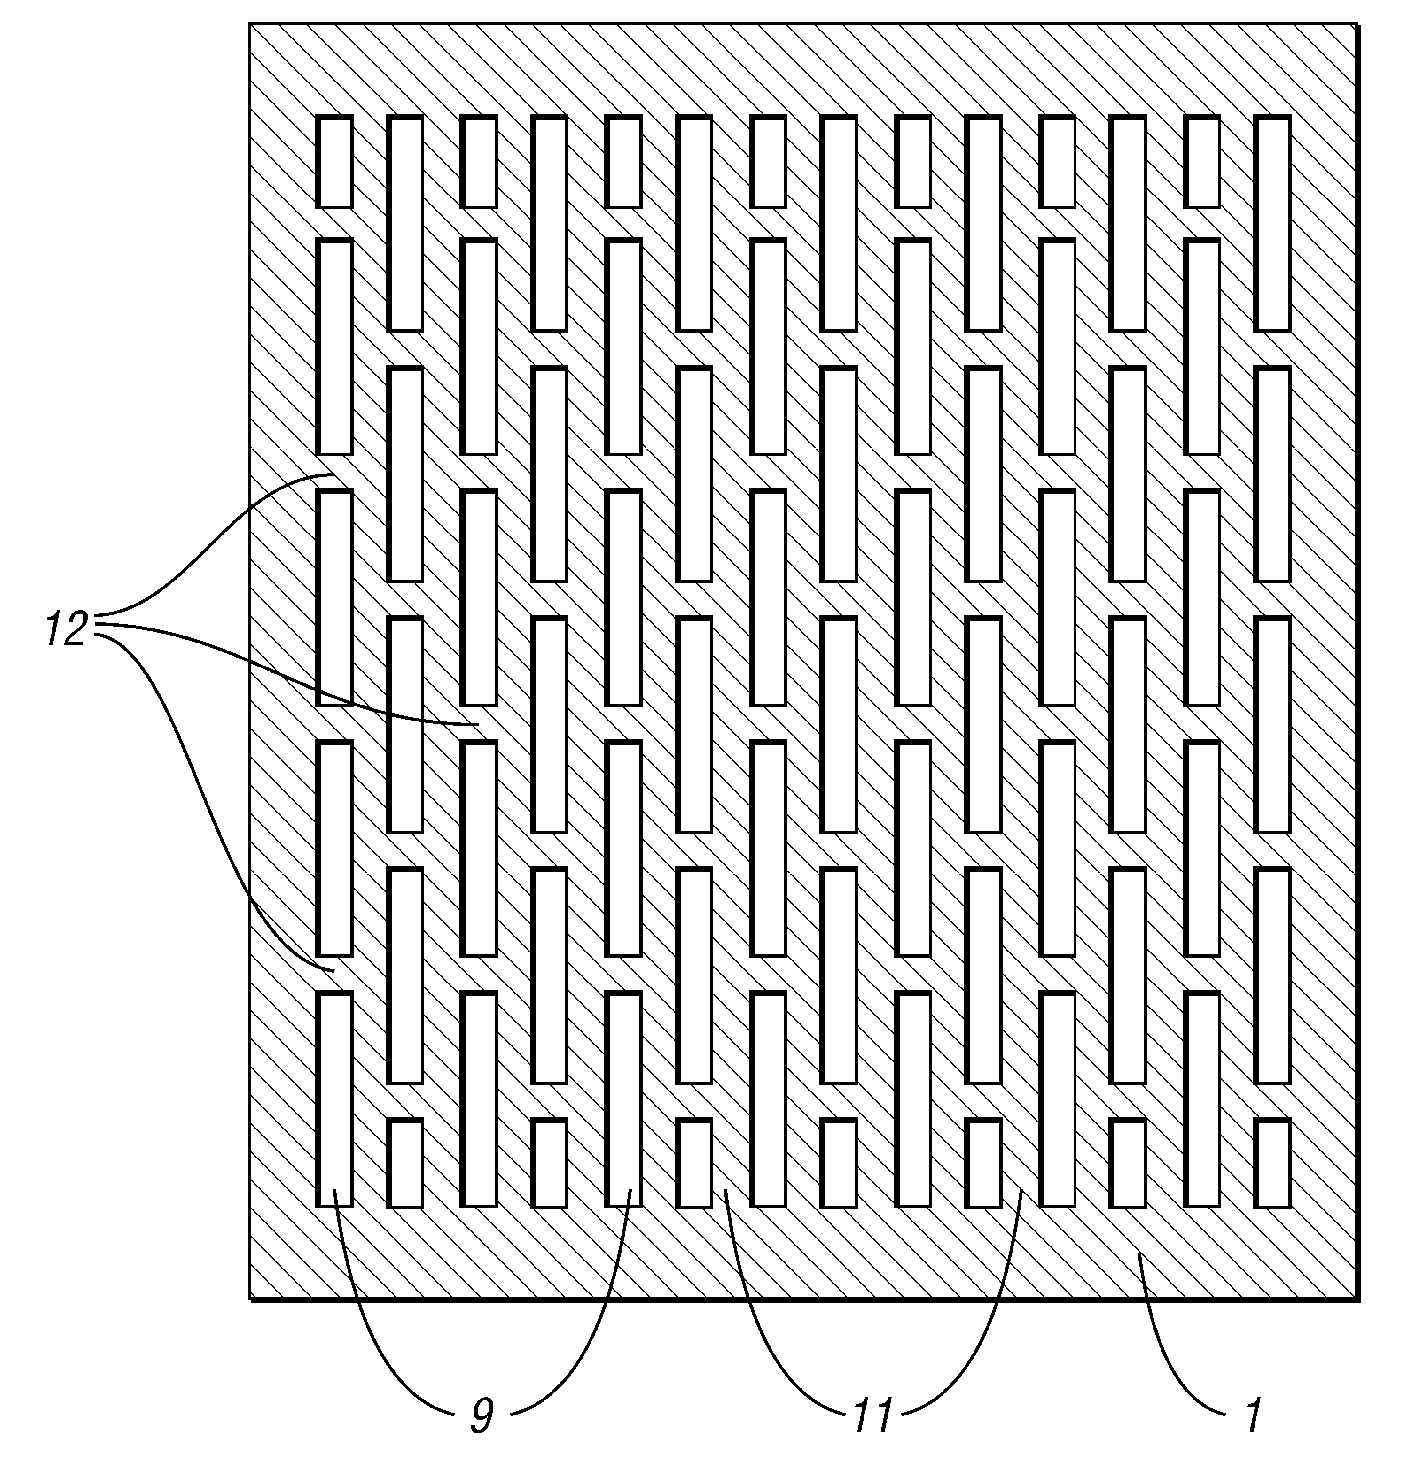 Non-streaming high-efficiency perforated semiconductor neutron detectors, methods of making same and measuring wand and detector modules utilizing same